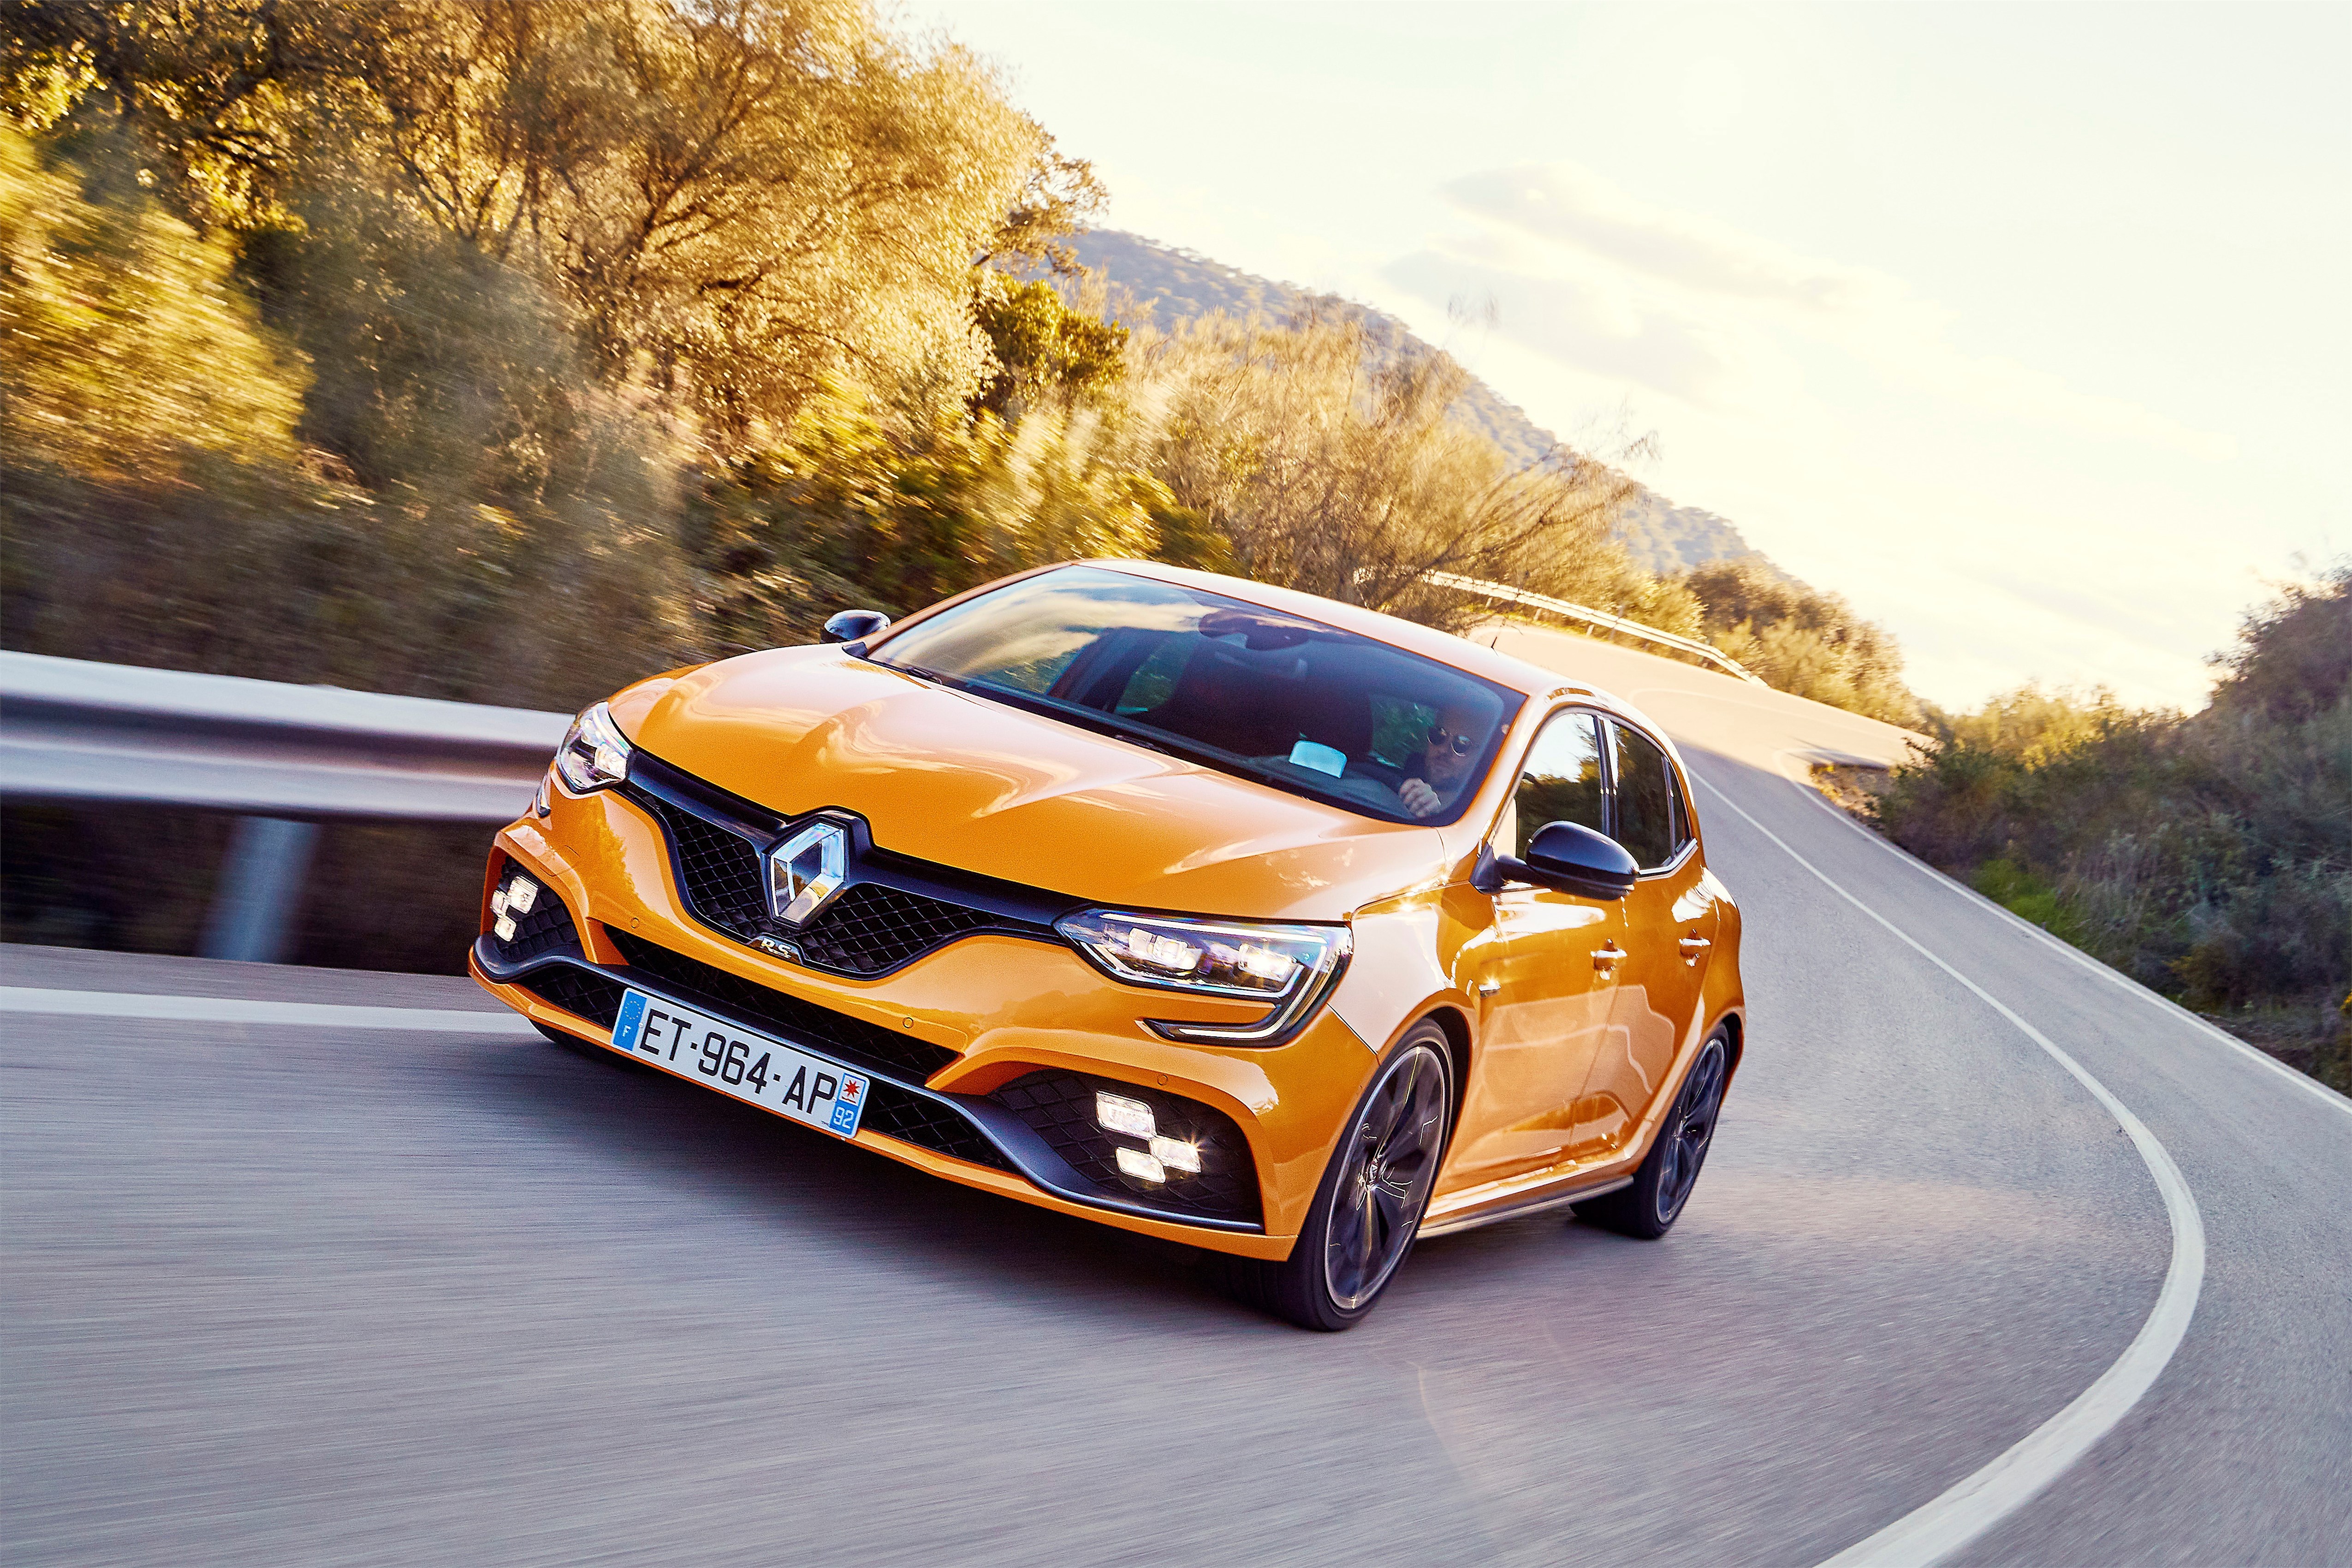 Renault Clio R.S. mod specifications